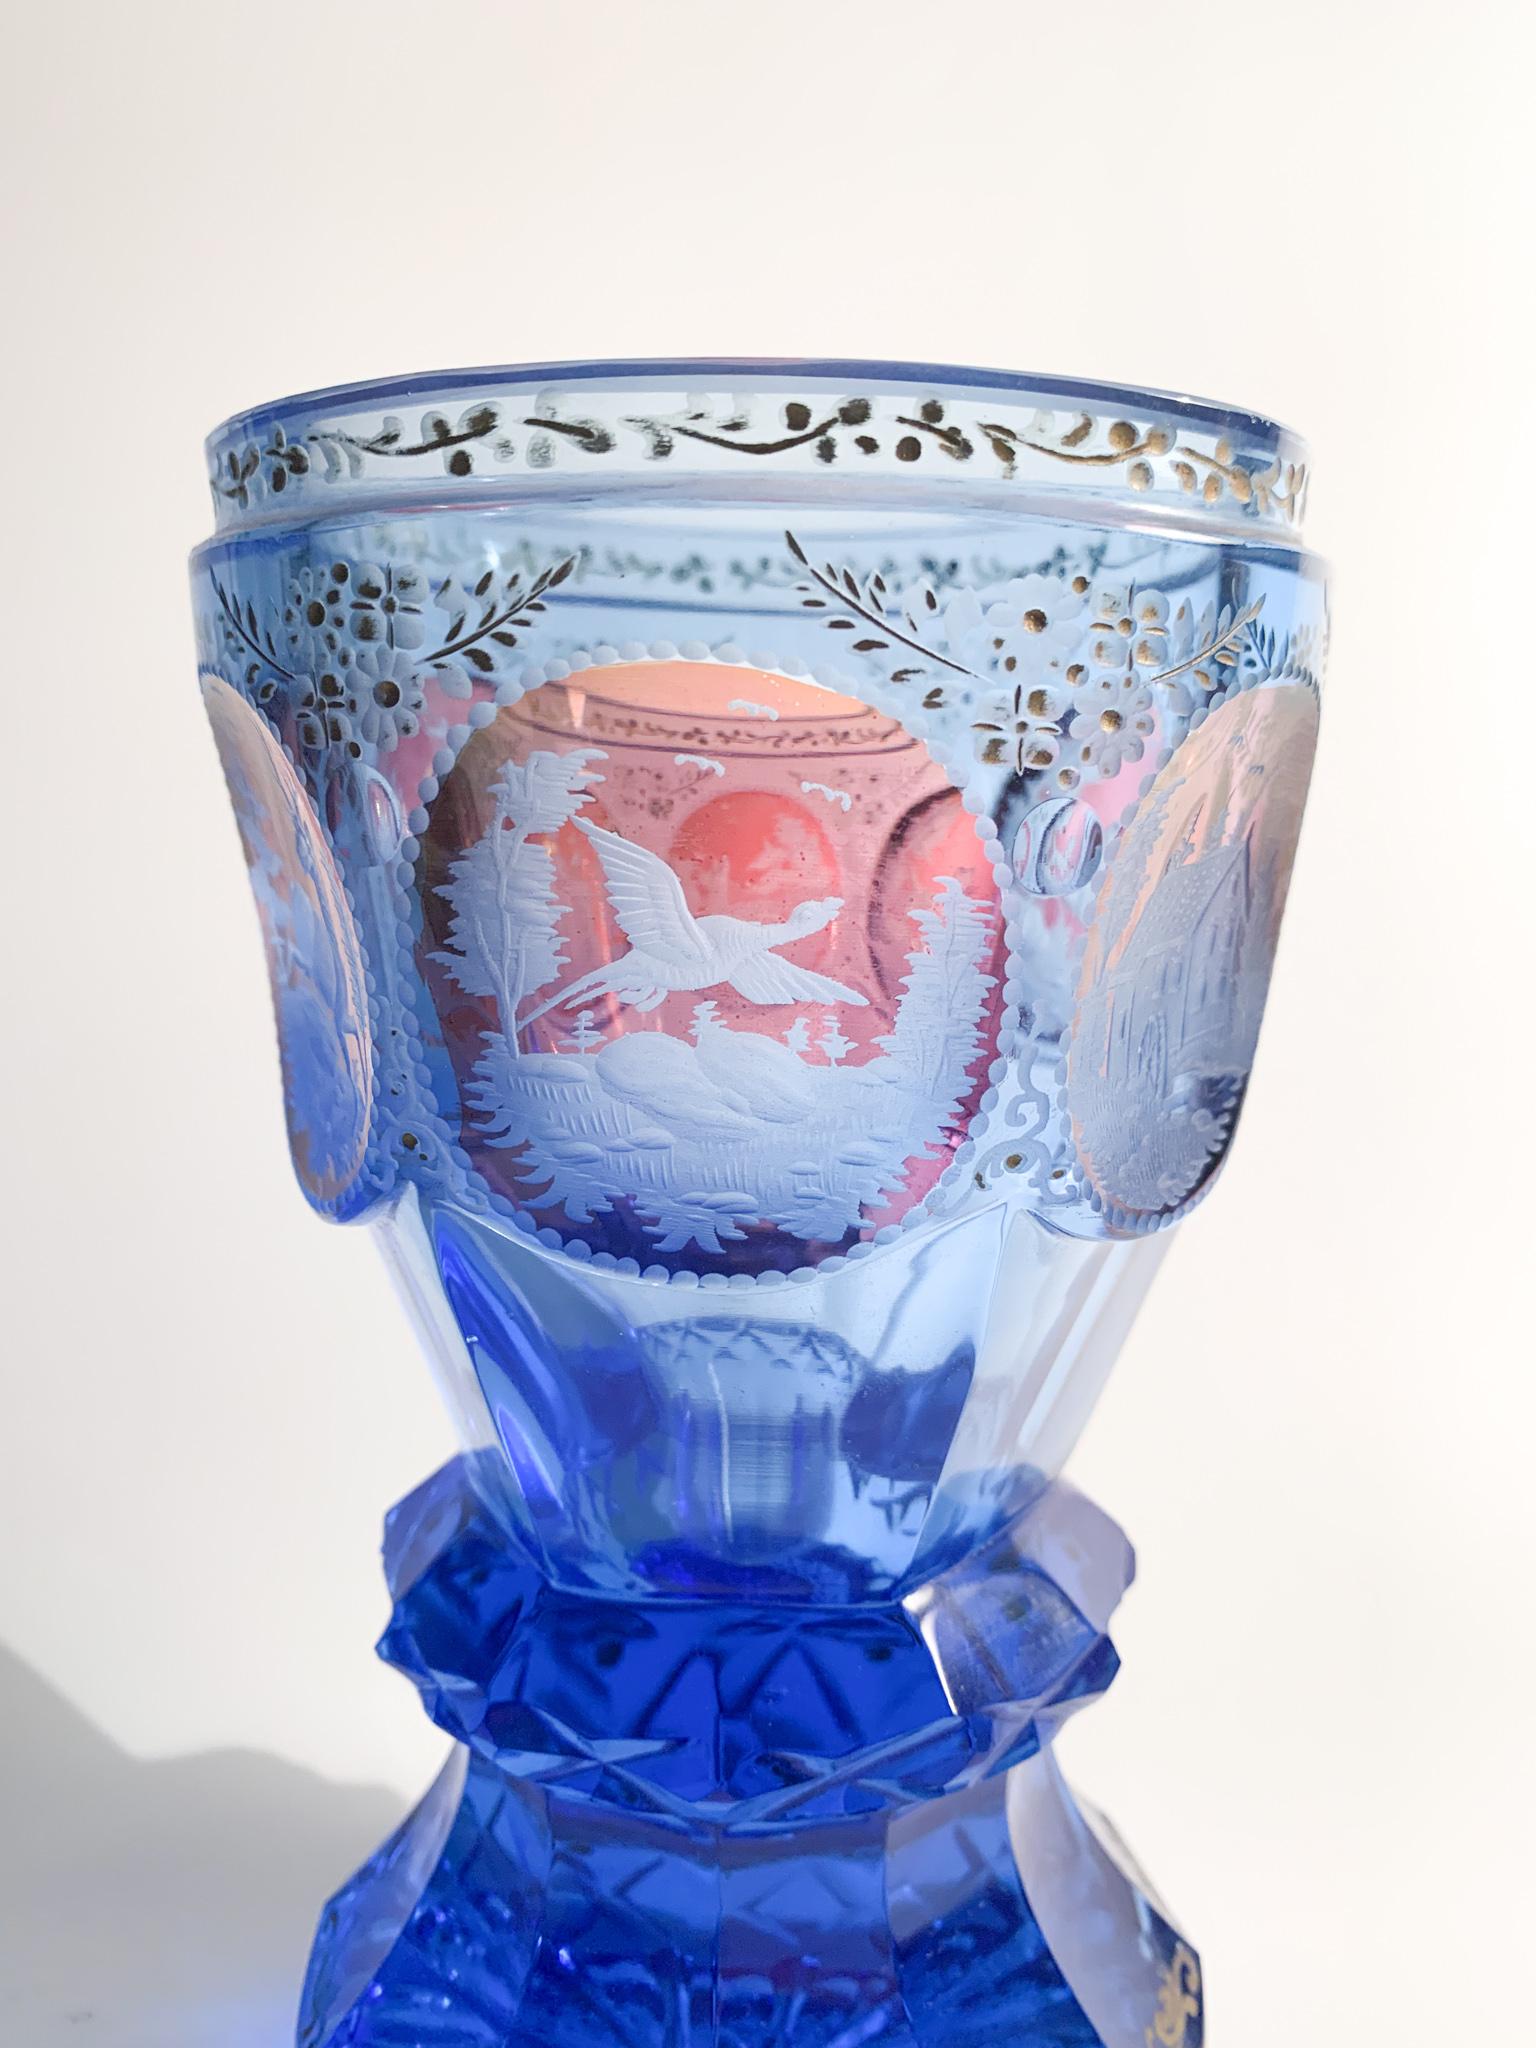 Late 19th Century Blue Biedermeier Crystal Glass with Acid Decorations from the 1800s